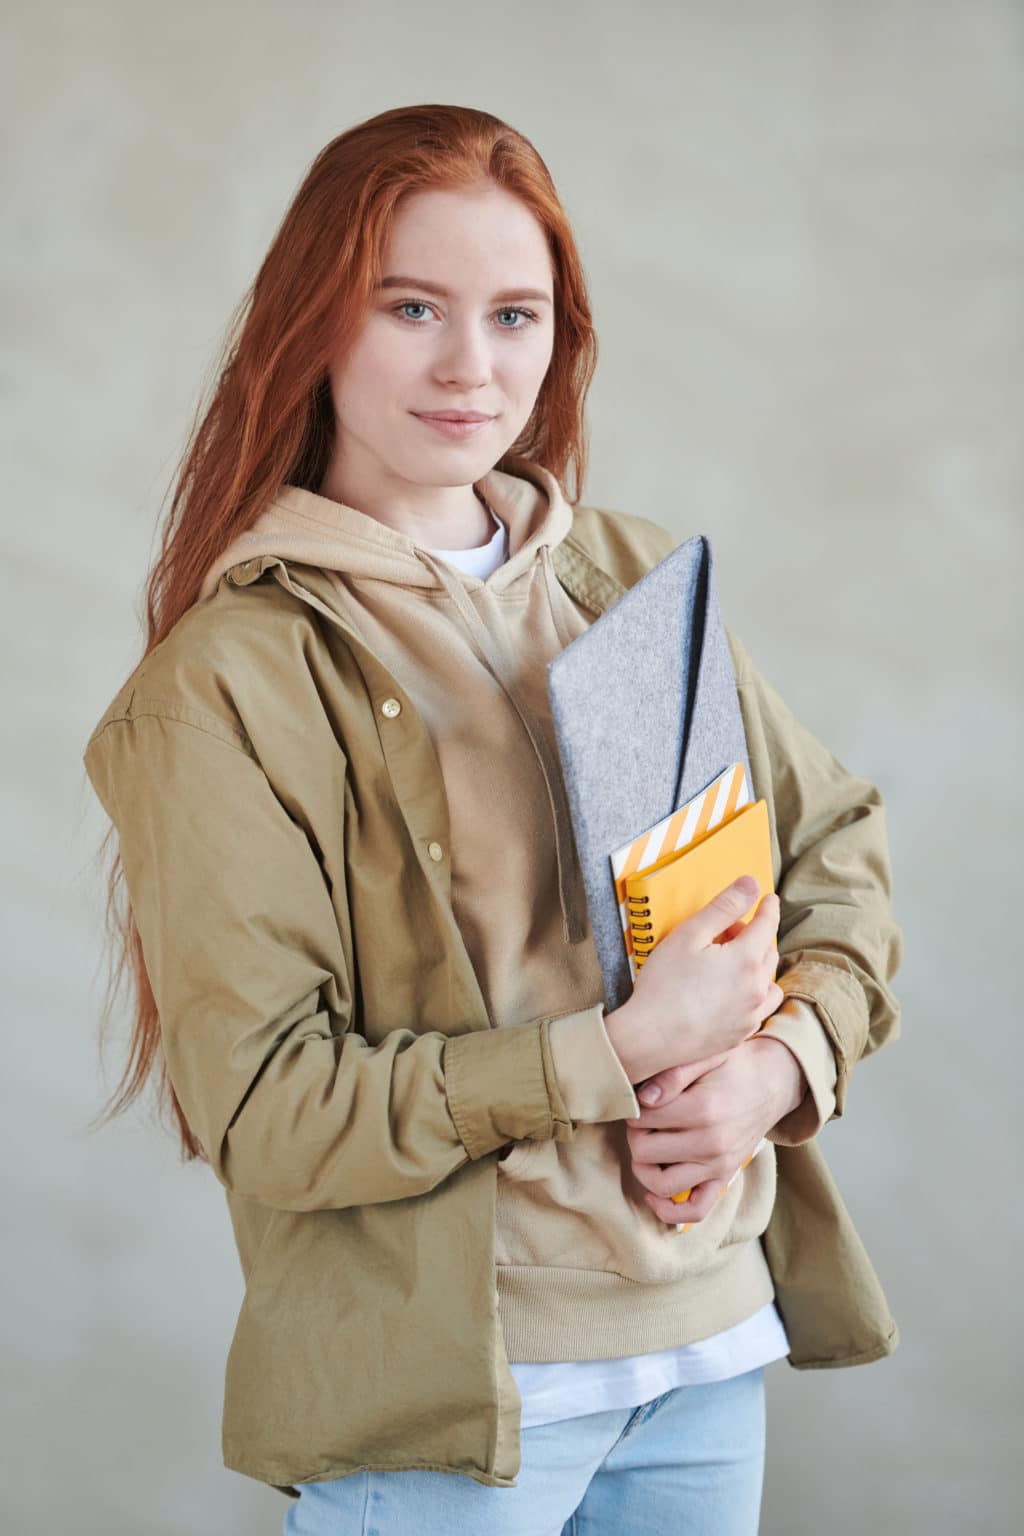 Student with red hair holding textbooks 1221245 1024x1536.jpg